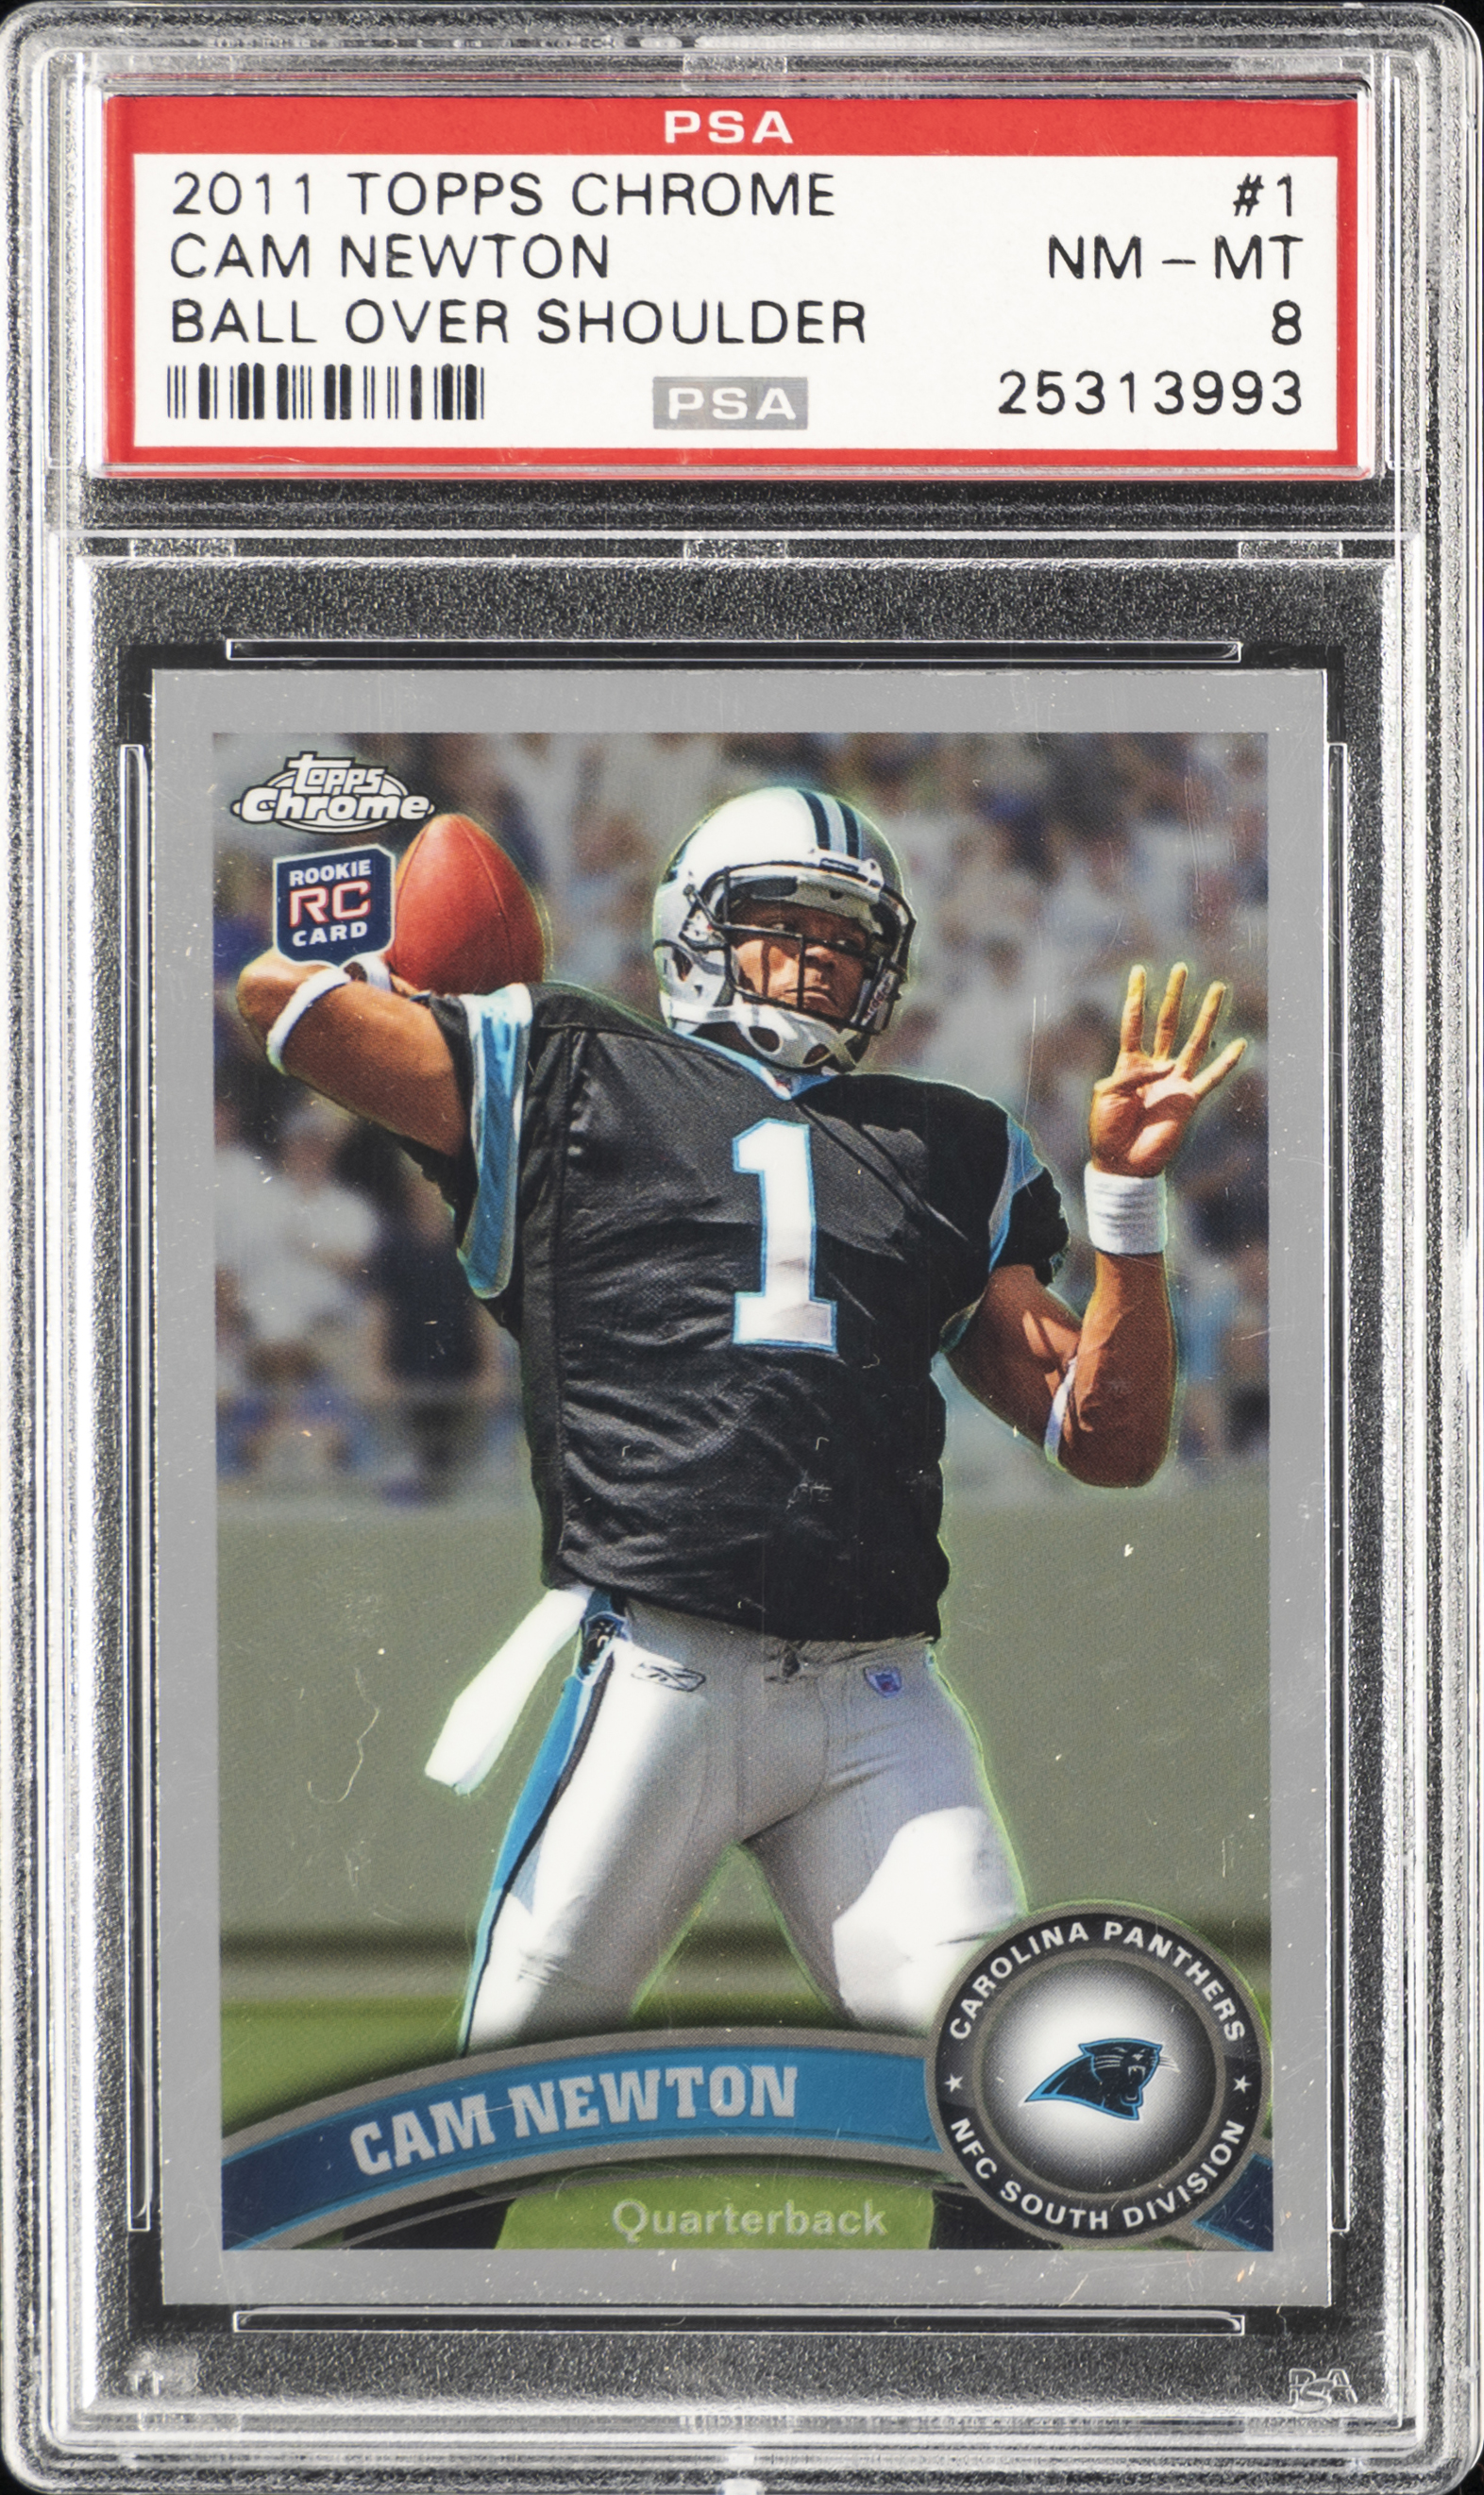 2011 Topps Chrome #1 Cam Newton Ball Over Right Shoulder Rookie Card – PSA NM-MT 8